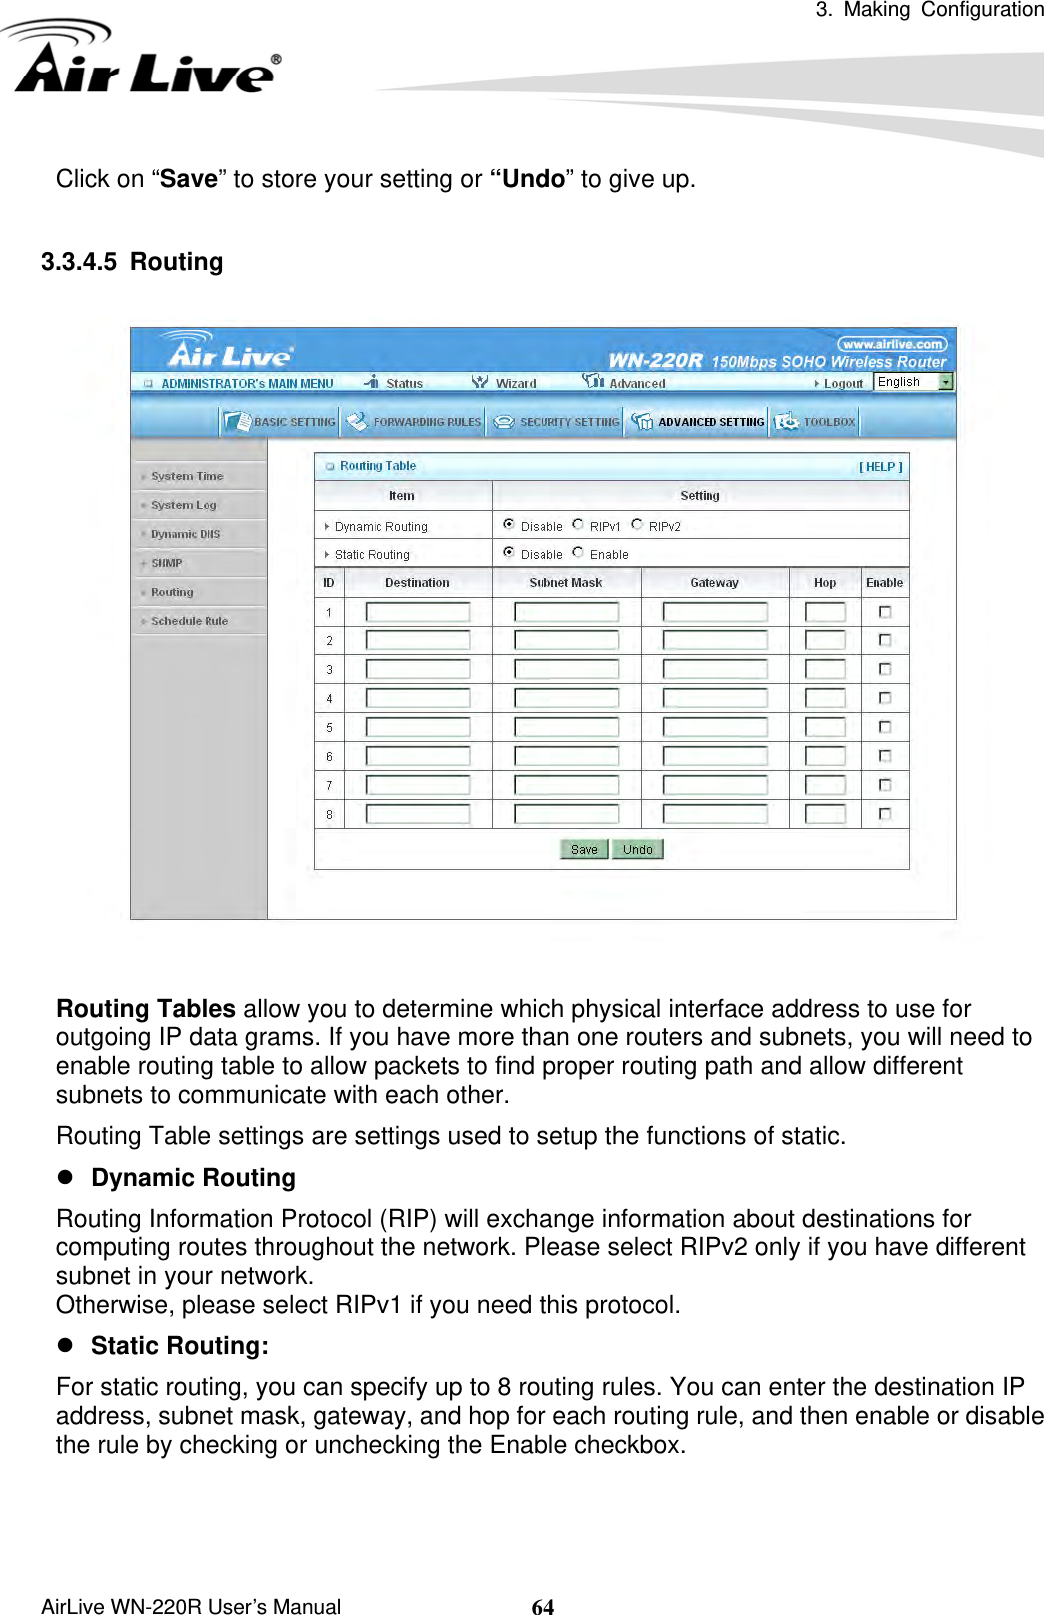  3. Making Configuration       AirLive WN-220R User’s Manual  64Click on “Save” to store your setting or “Undo” to give up.  3.3.4.5 Routing    Routing Tables allow you to determine which physical interface address to use for outgoing IP data grams. If you have more than one routers and subnets, you will need to enable routing table to allow packets to find proper routing path and allow different subnets to communicate with each other. Routing Table settings are settings used to setup the functions of static. z Dynamic Routing Routing Information Protocol (RIP) will exchange information about destinations for computing routes throughout the network. Please select RIPv2 only if you have different subnet in your network. Otherwise, please select RIPv1 if you need this protocol. z Static Routing:   For static routing, you can specify up to 8 routing rules. You can enter the destination IP address, subnet mask, gateway, and hop for each routing rule, and then enable or disable the rule by checking or unchecking the Enable checkbox.   